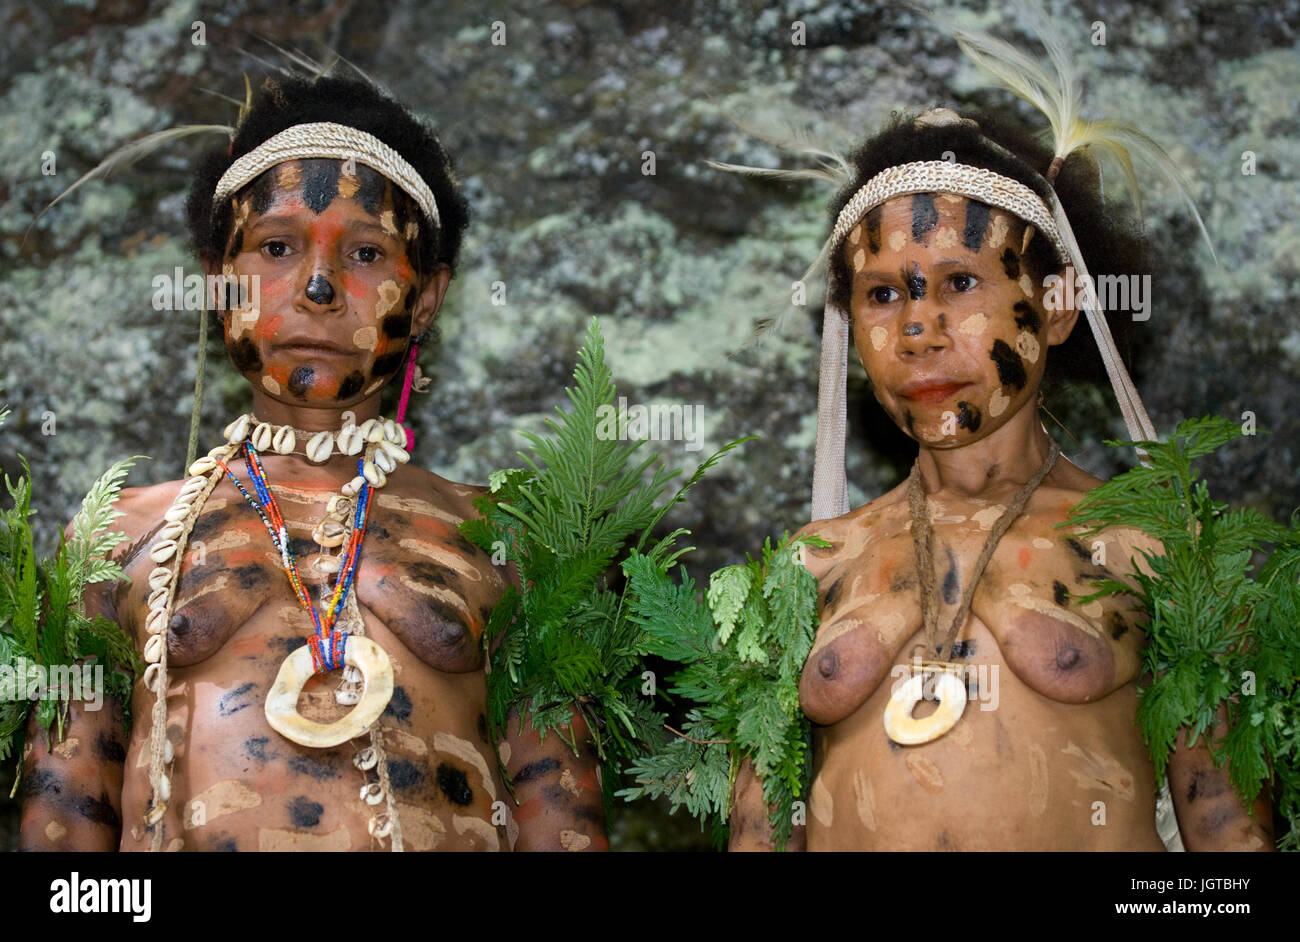 NEW GUINEA, INDONESIA - 13 JANUARY: Women Yaffi tribe in traditional coloring. Stock Photo